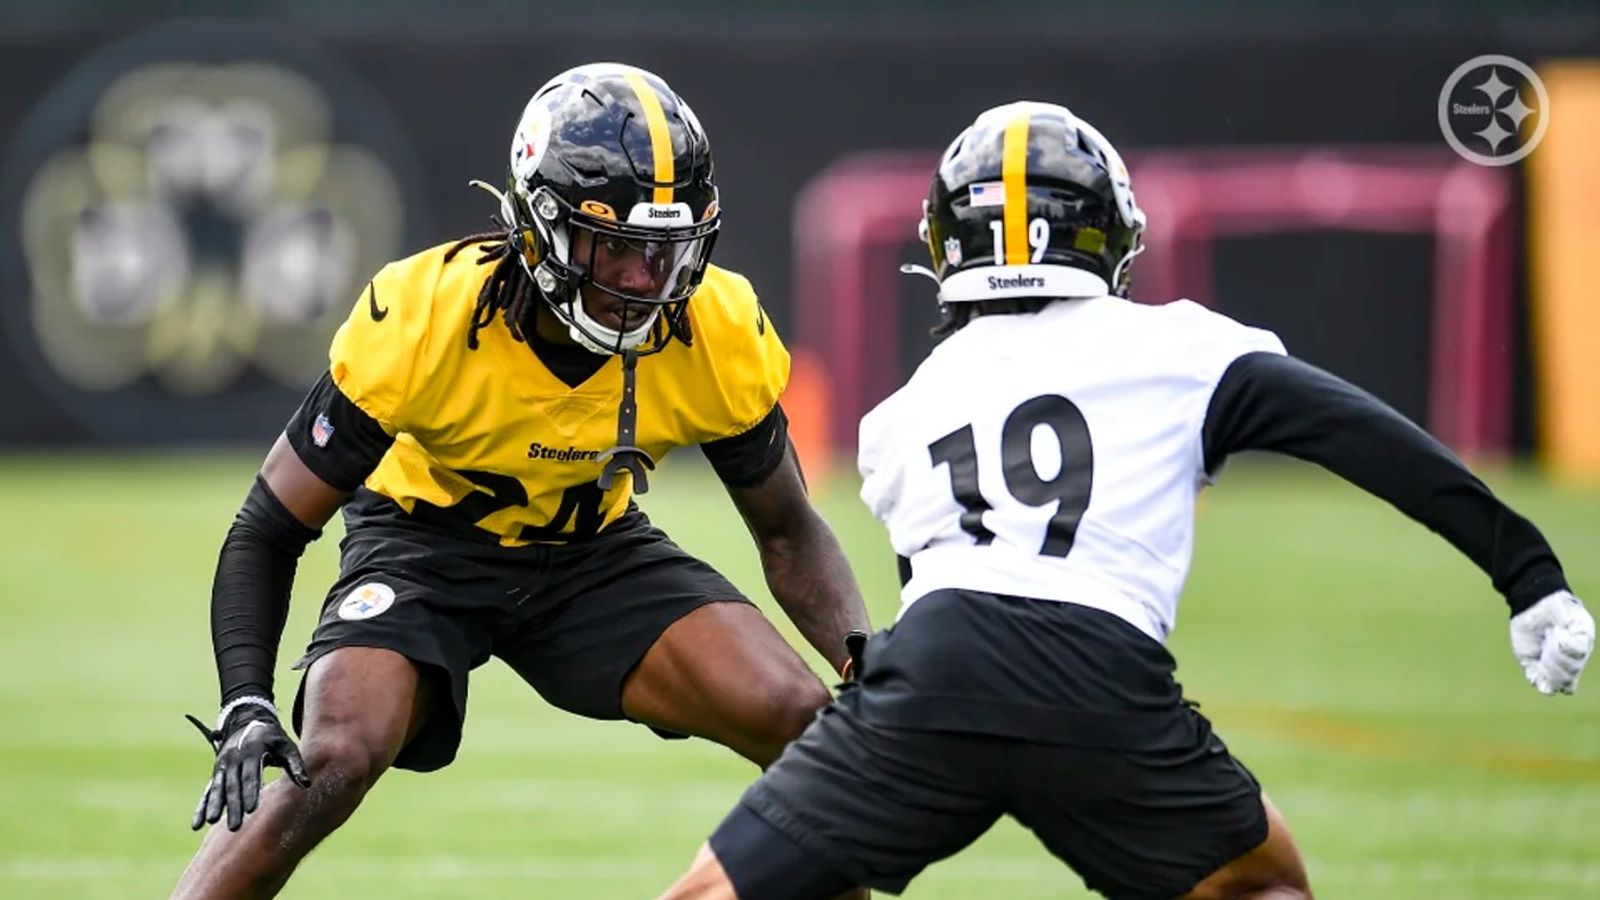 The Steelers are bringing rookies Jones and Porter along slowly. Might be  time to speed it up